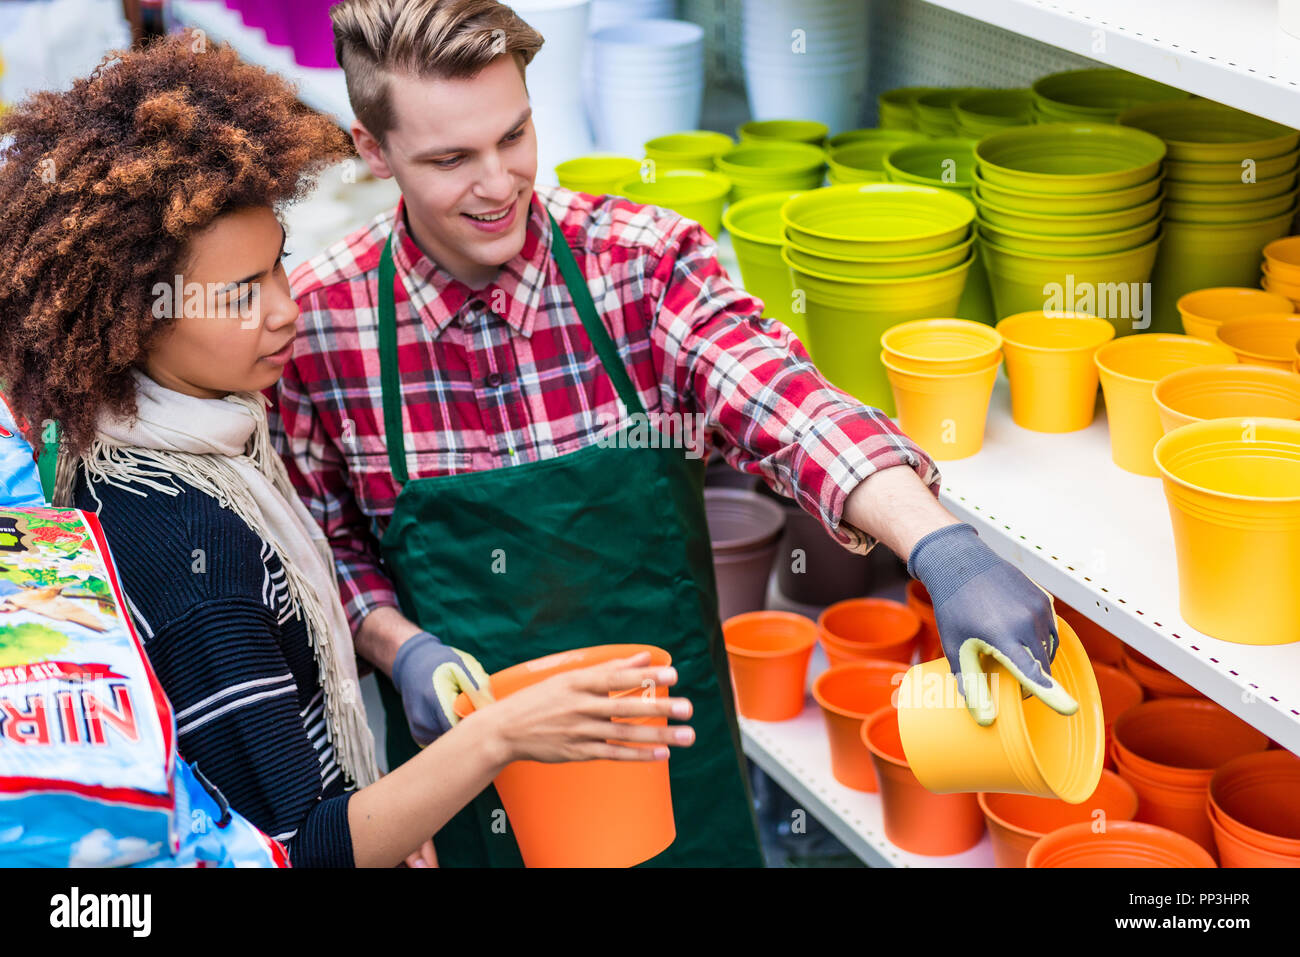 Customer buying plastic pots at the advice of a helpful worker Stock Photo